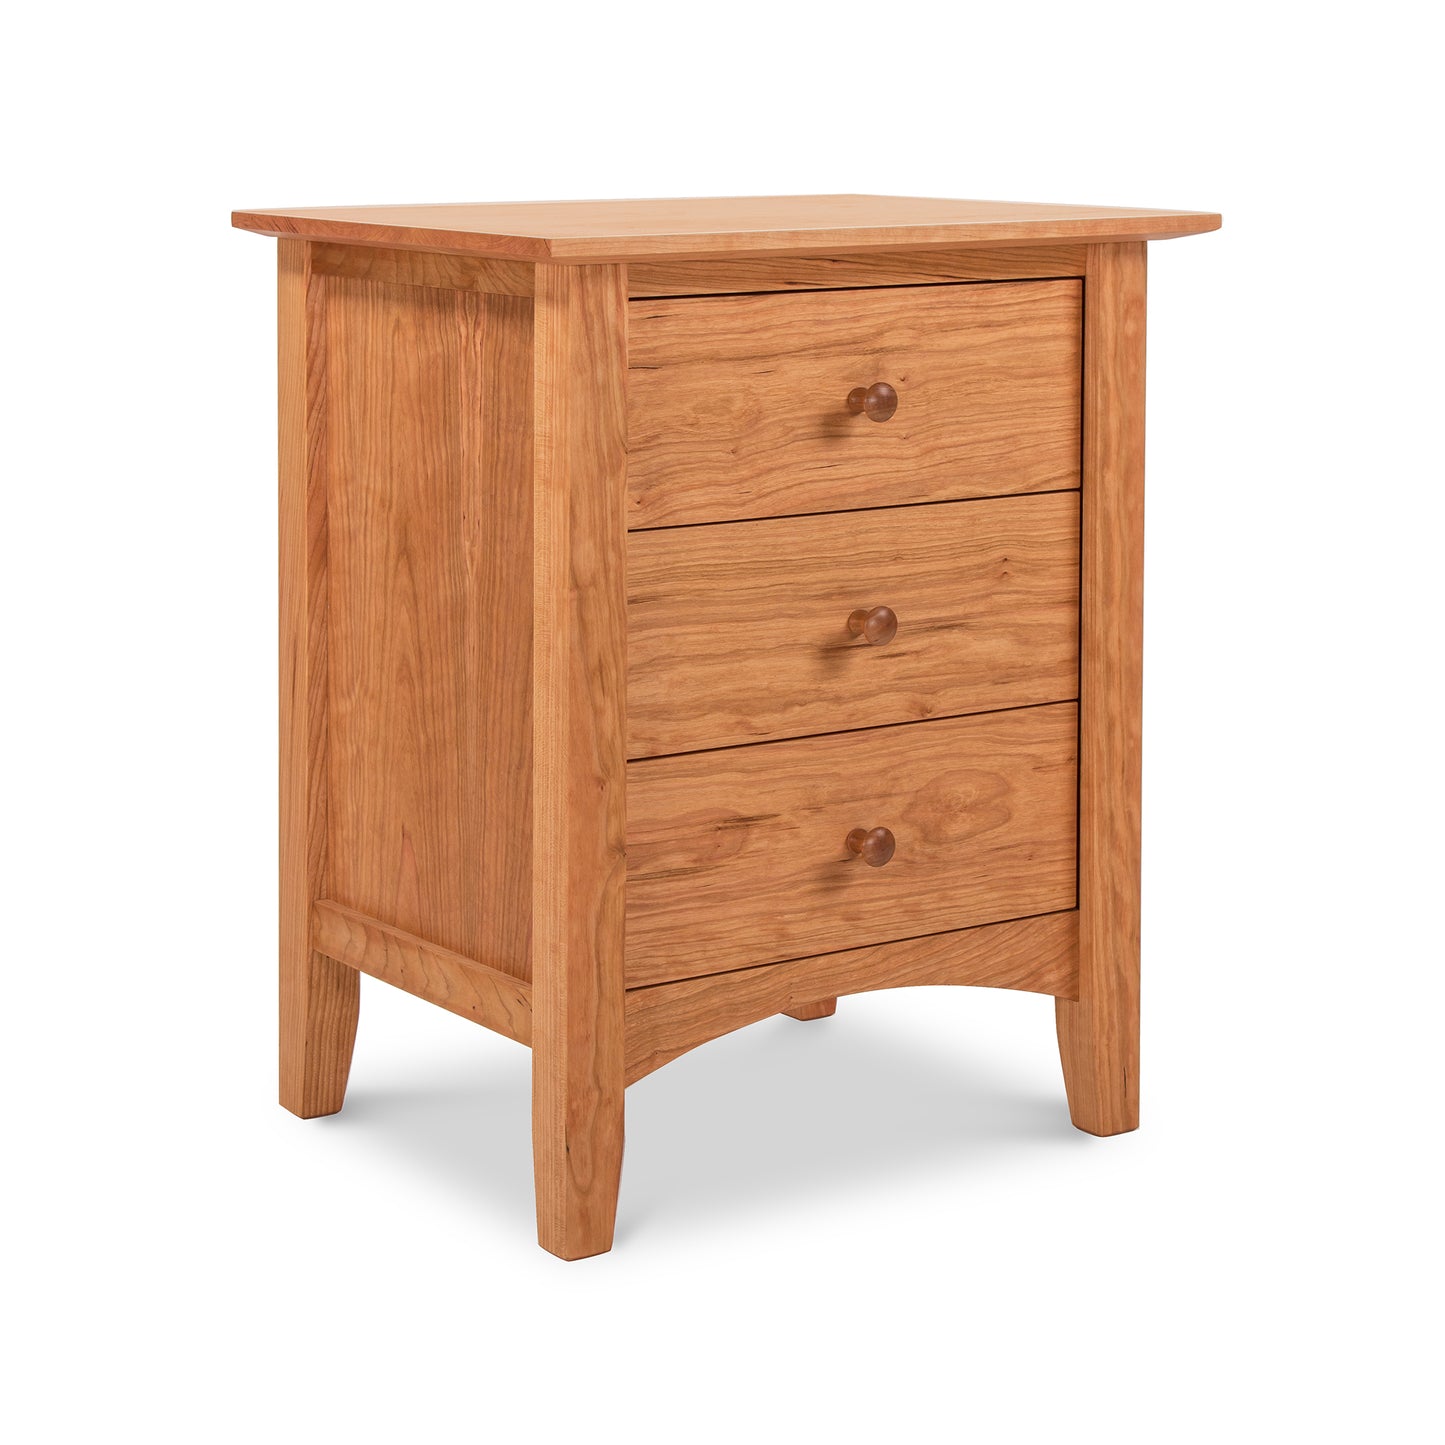 An American Shaker 3-Drawer Nightstand, expertly handcrafted in Vermont by Maple Corner Woodworks with three drawers.